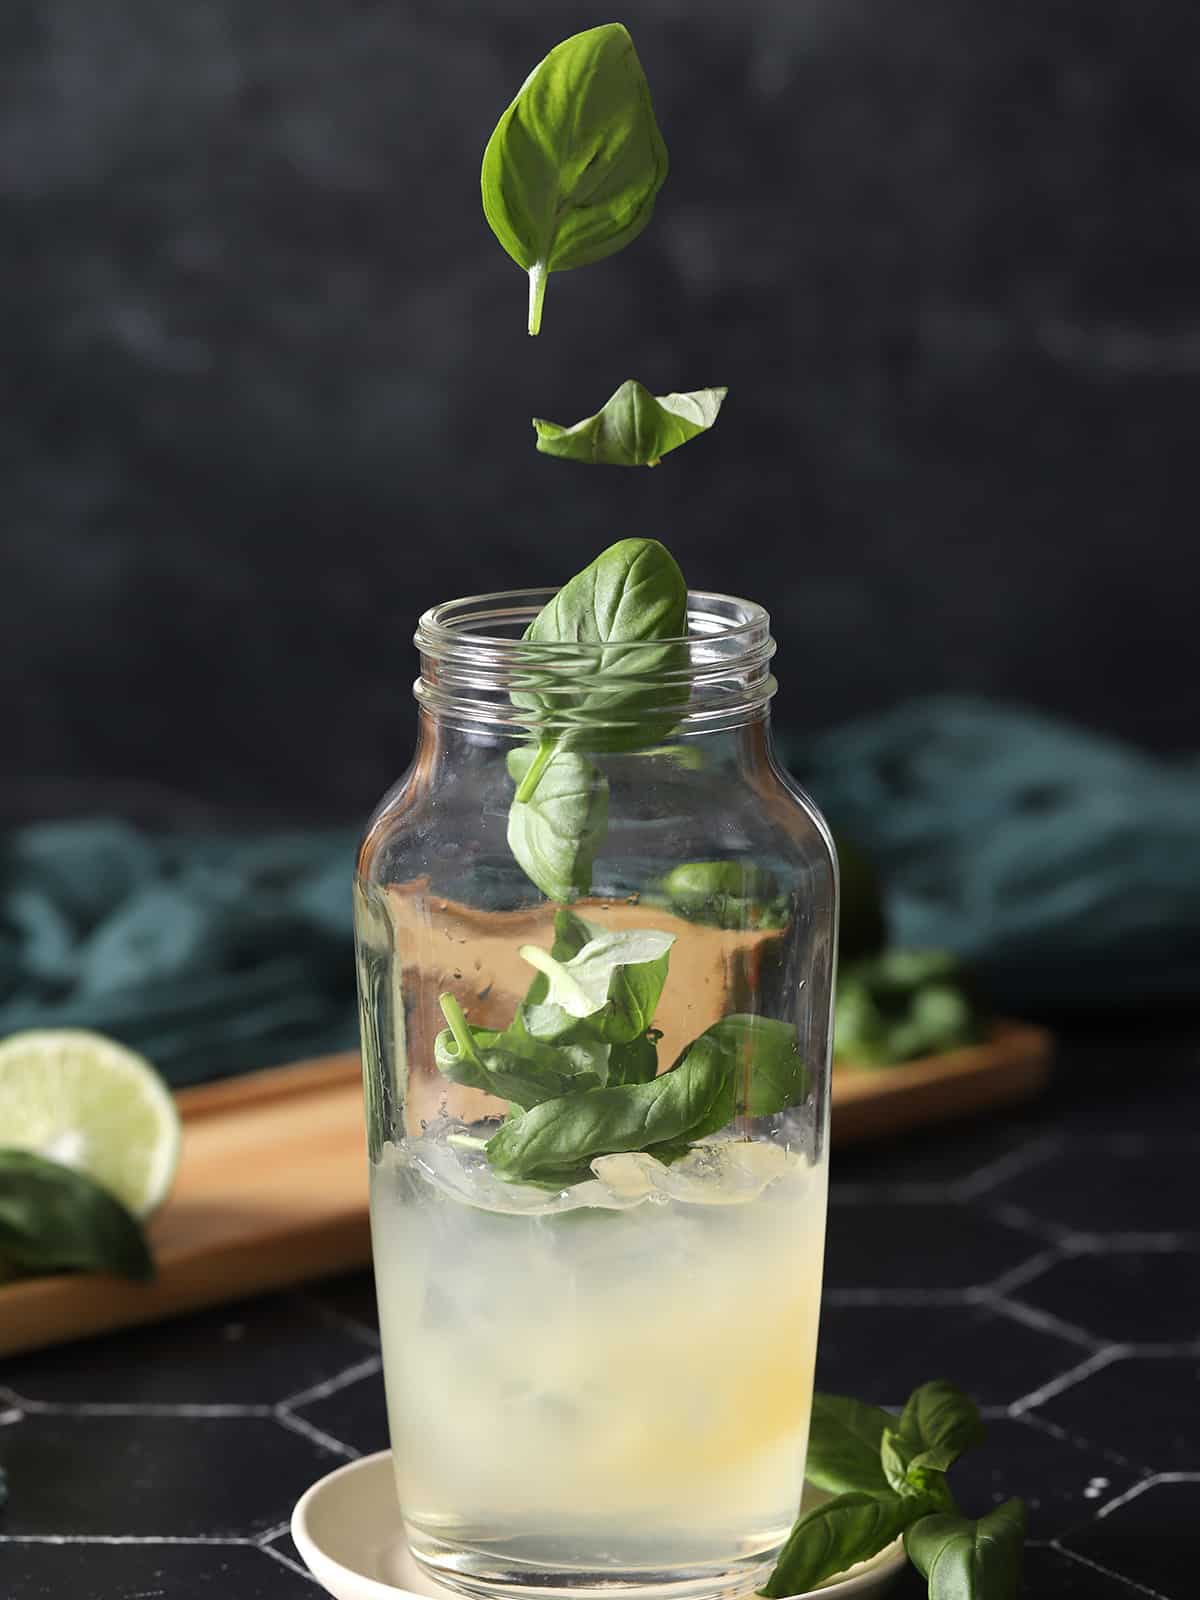 Basil leaves being dropped into a cocktail shaker. 